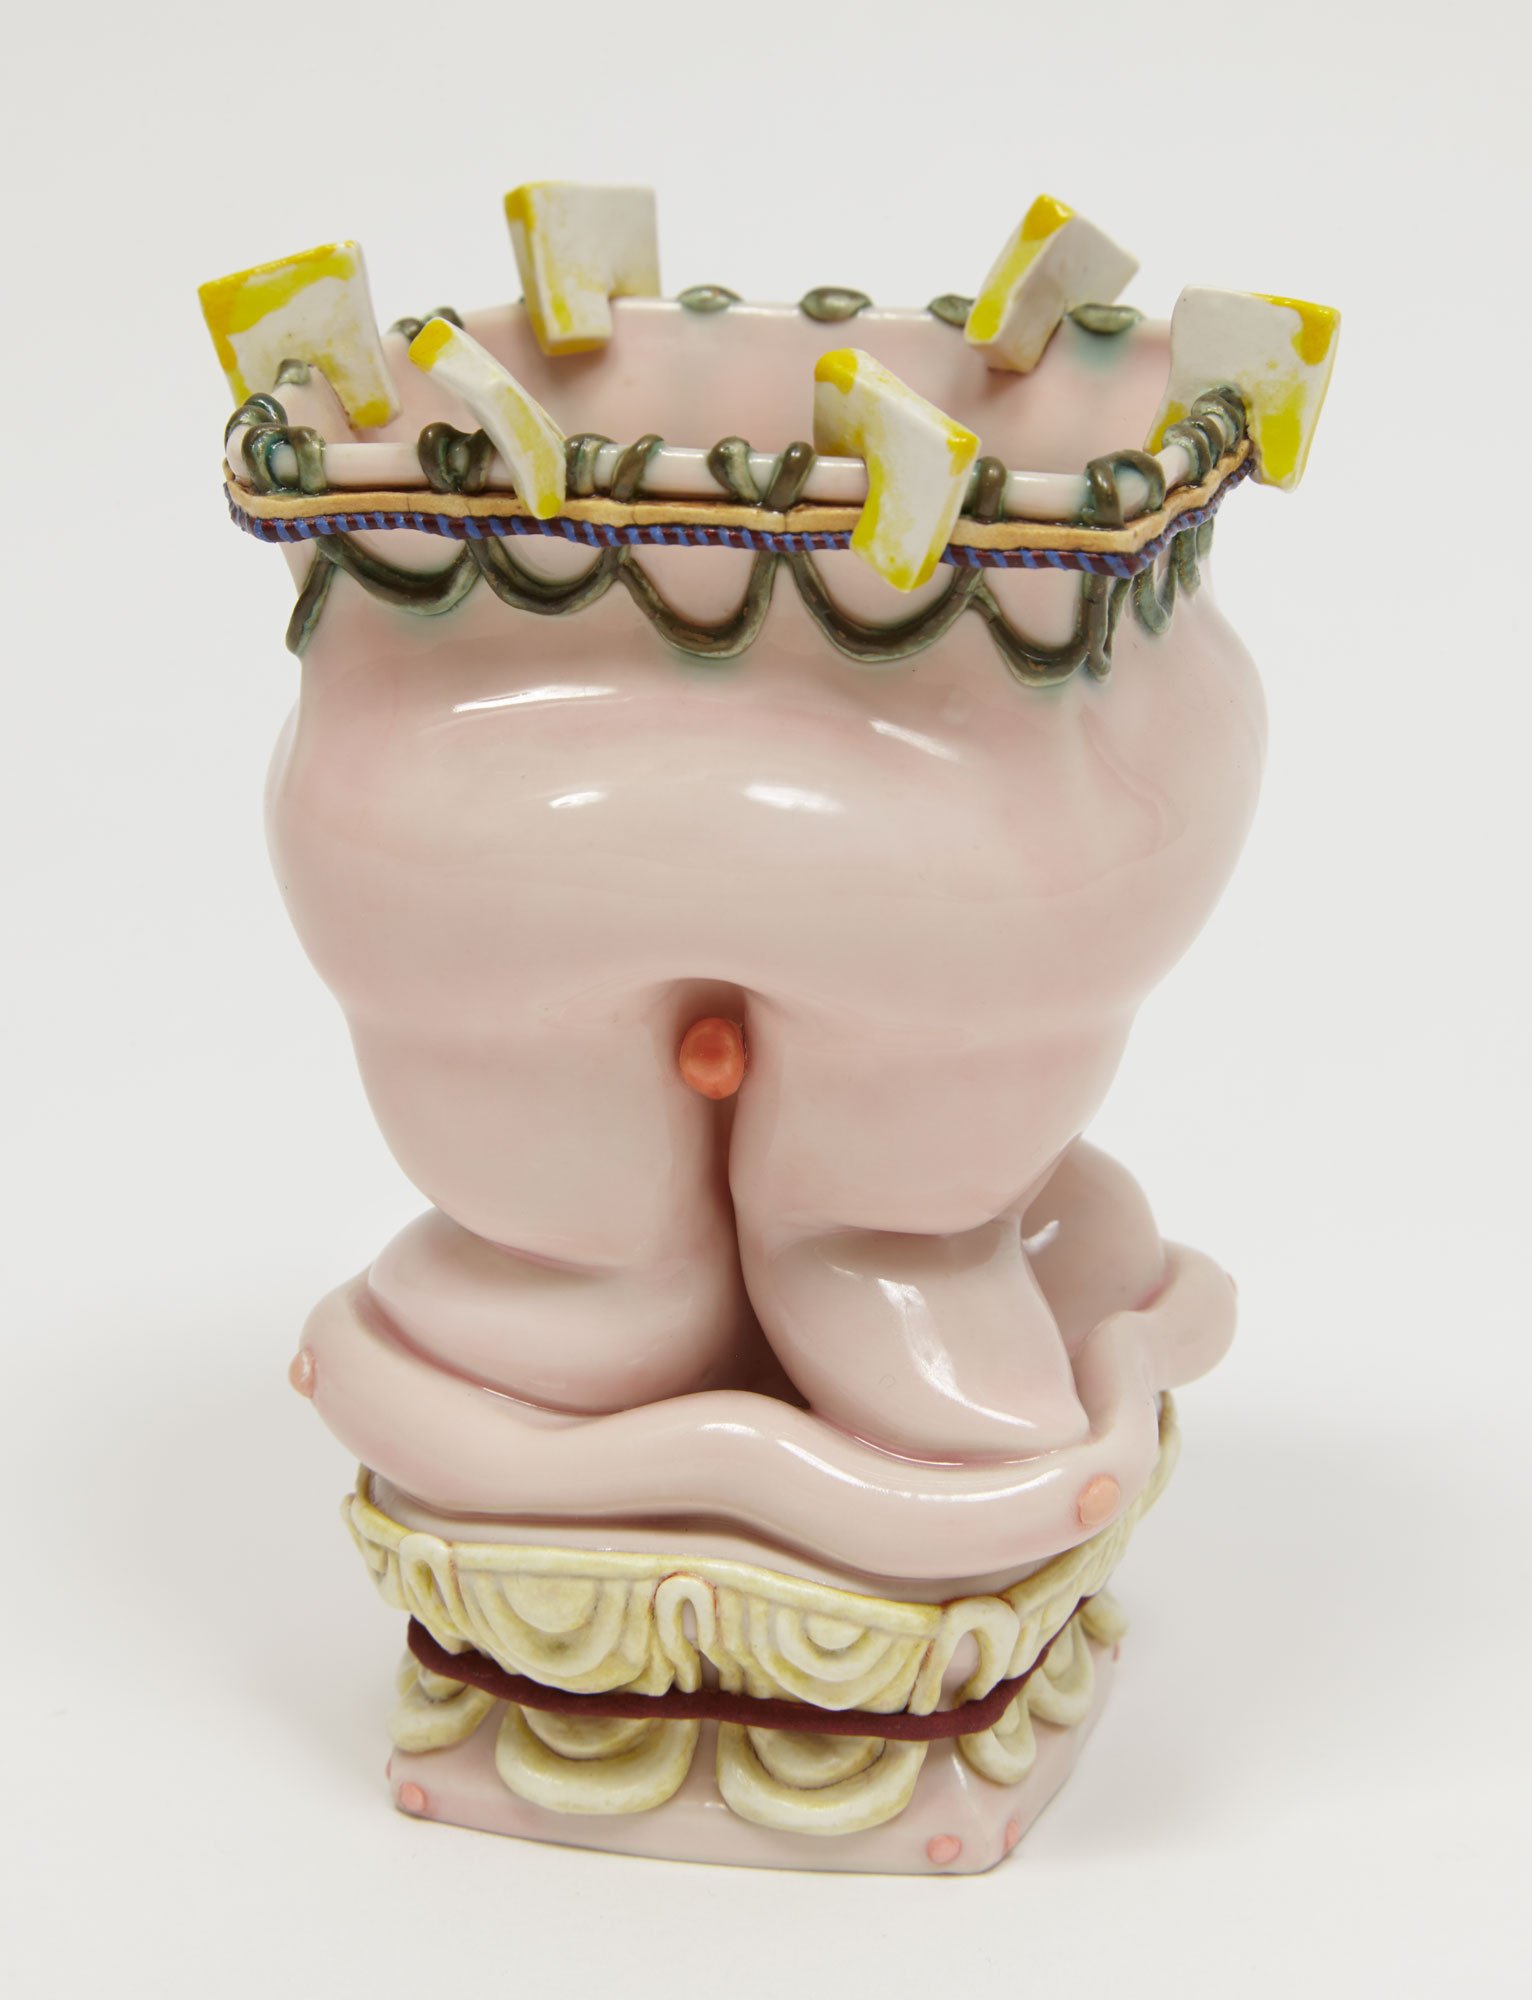  Kathy Butterly (United States, born 1963),  Like Butter , 1997, clay, glaze, 4 1/2 x 3 3/4 x 3 3/8 inches. Courtesy of the artist © Kathy Butterly. Image courtesy the artist and James Cohan, New York. Photo: Alan Wiener.  